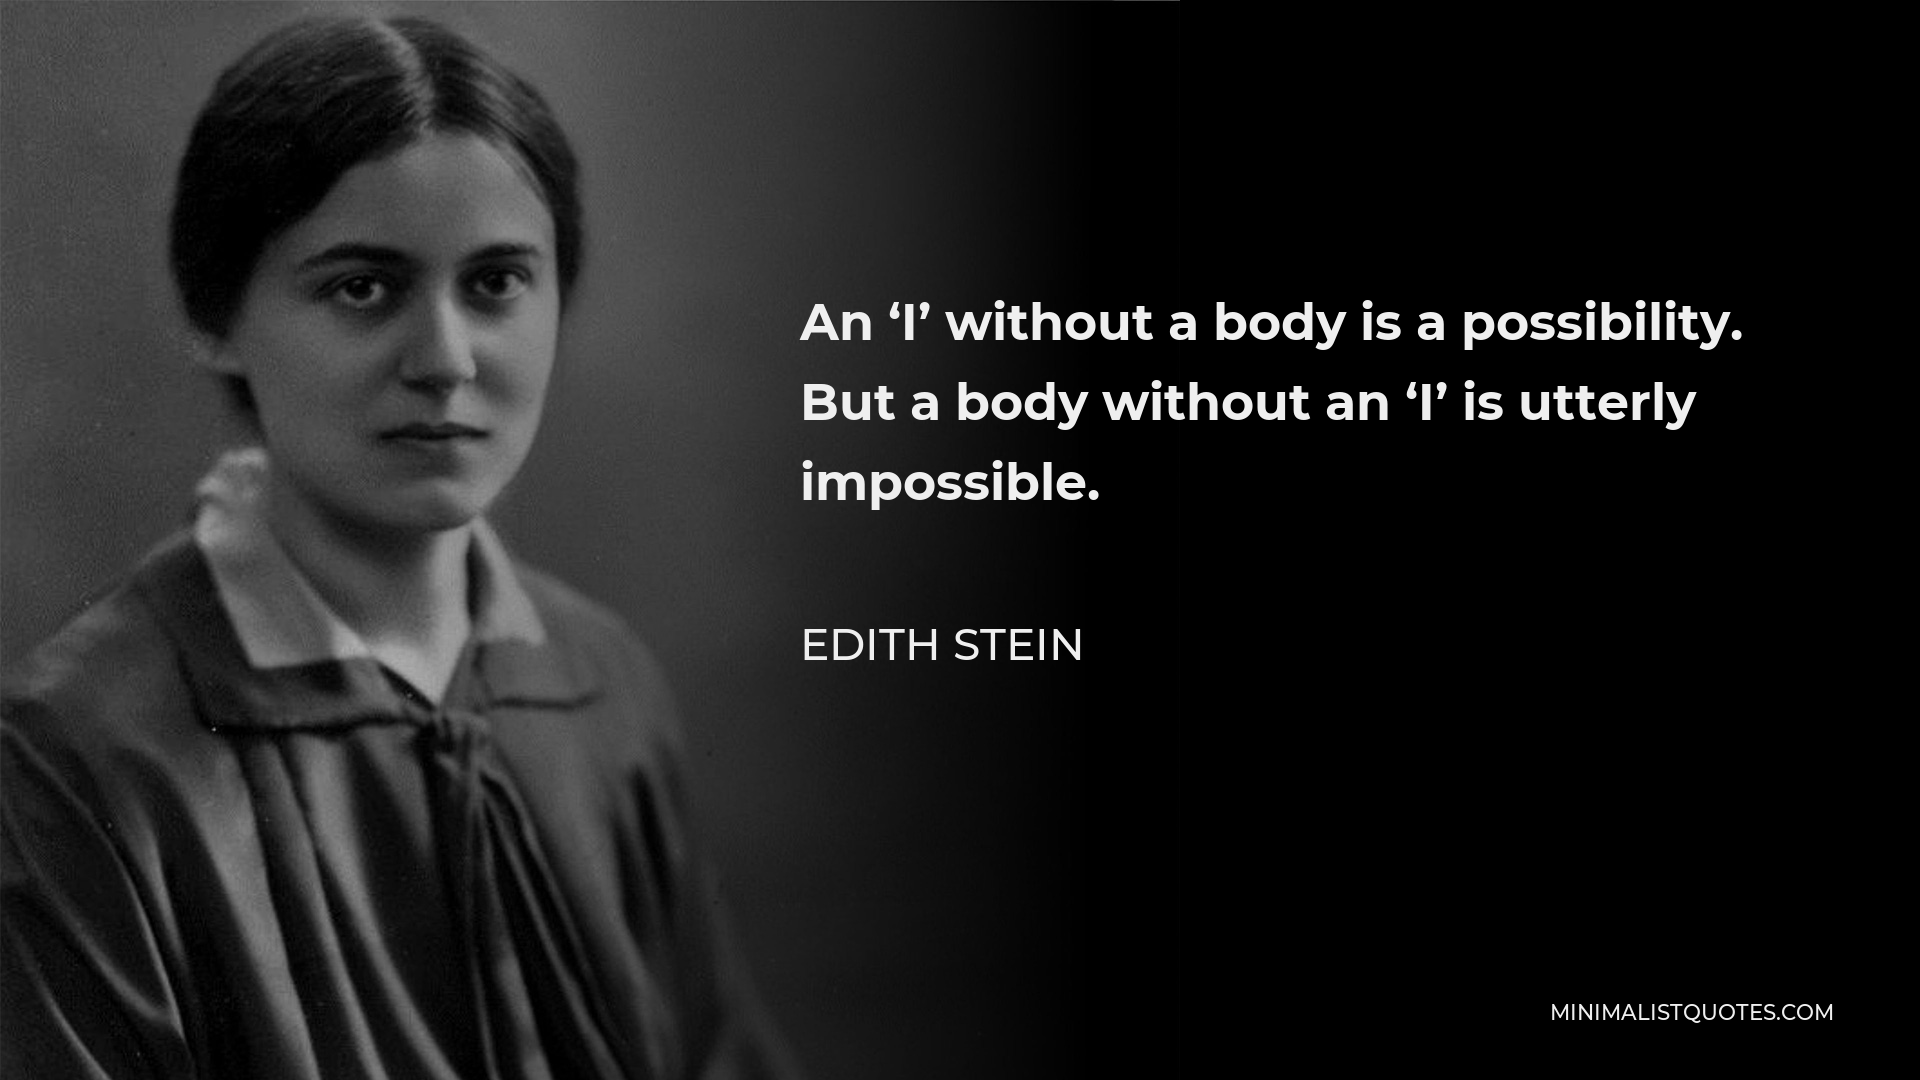 Edith Stein Quote - An ‘I’ without a body is a possibility. But a body without an ‘I’ is utterly impossible.